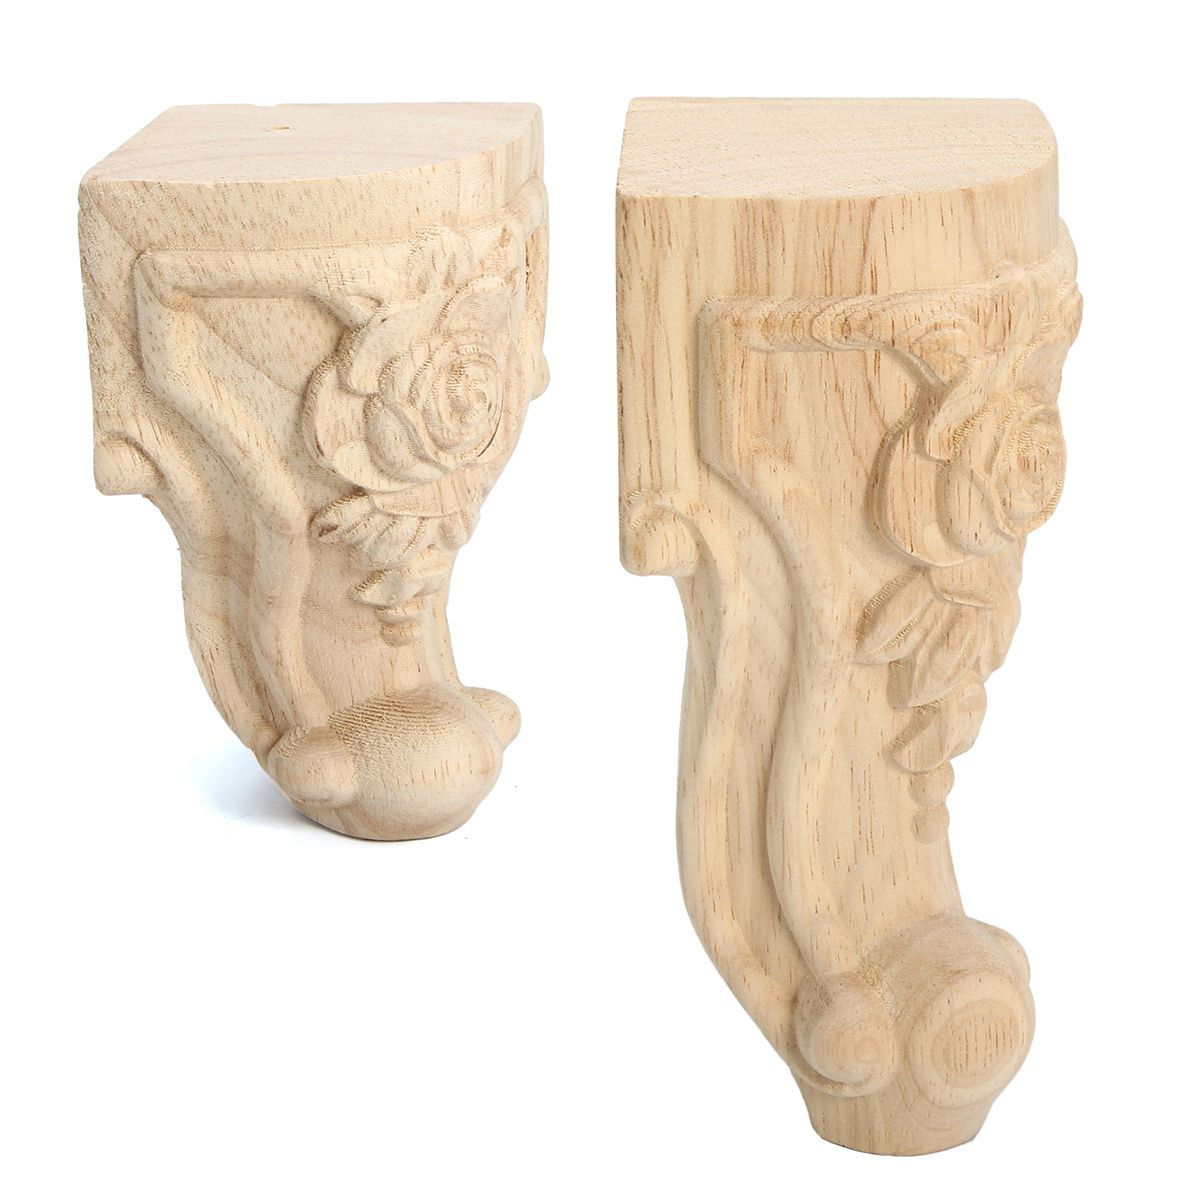 4Pcs-Solid-Wood-Carved-Furniture-Foot-Leg-Support-TV-Cabinet-Couch-Sofa-European-Style-1457255